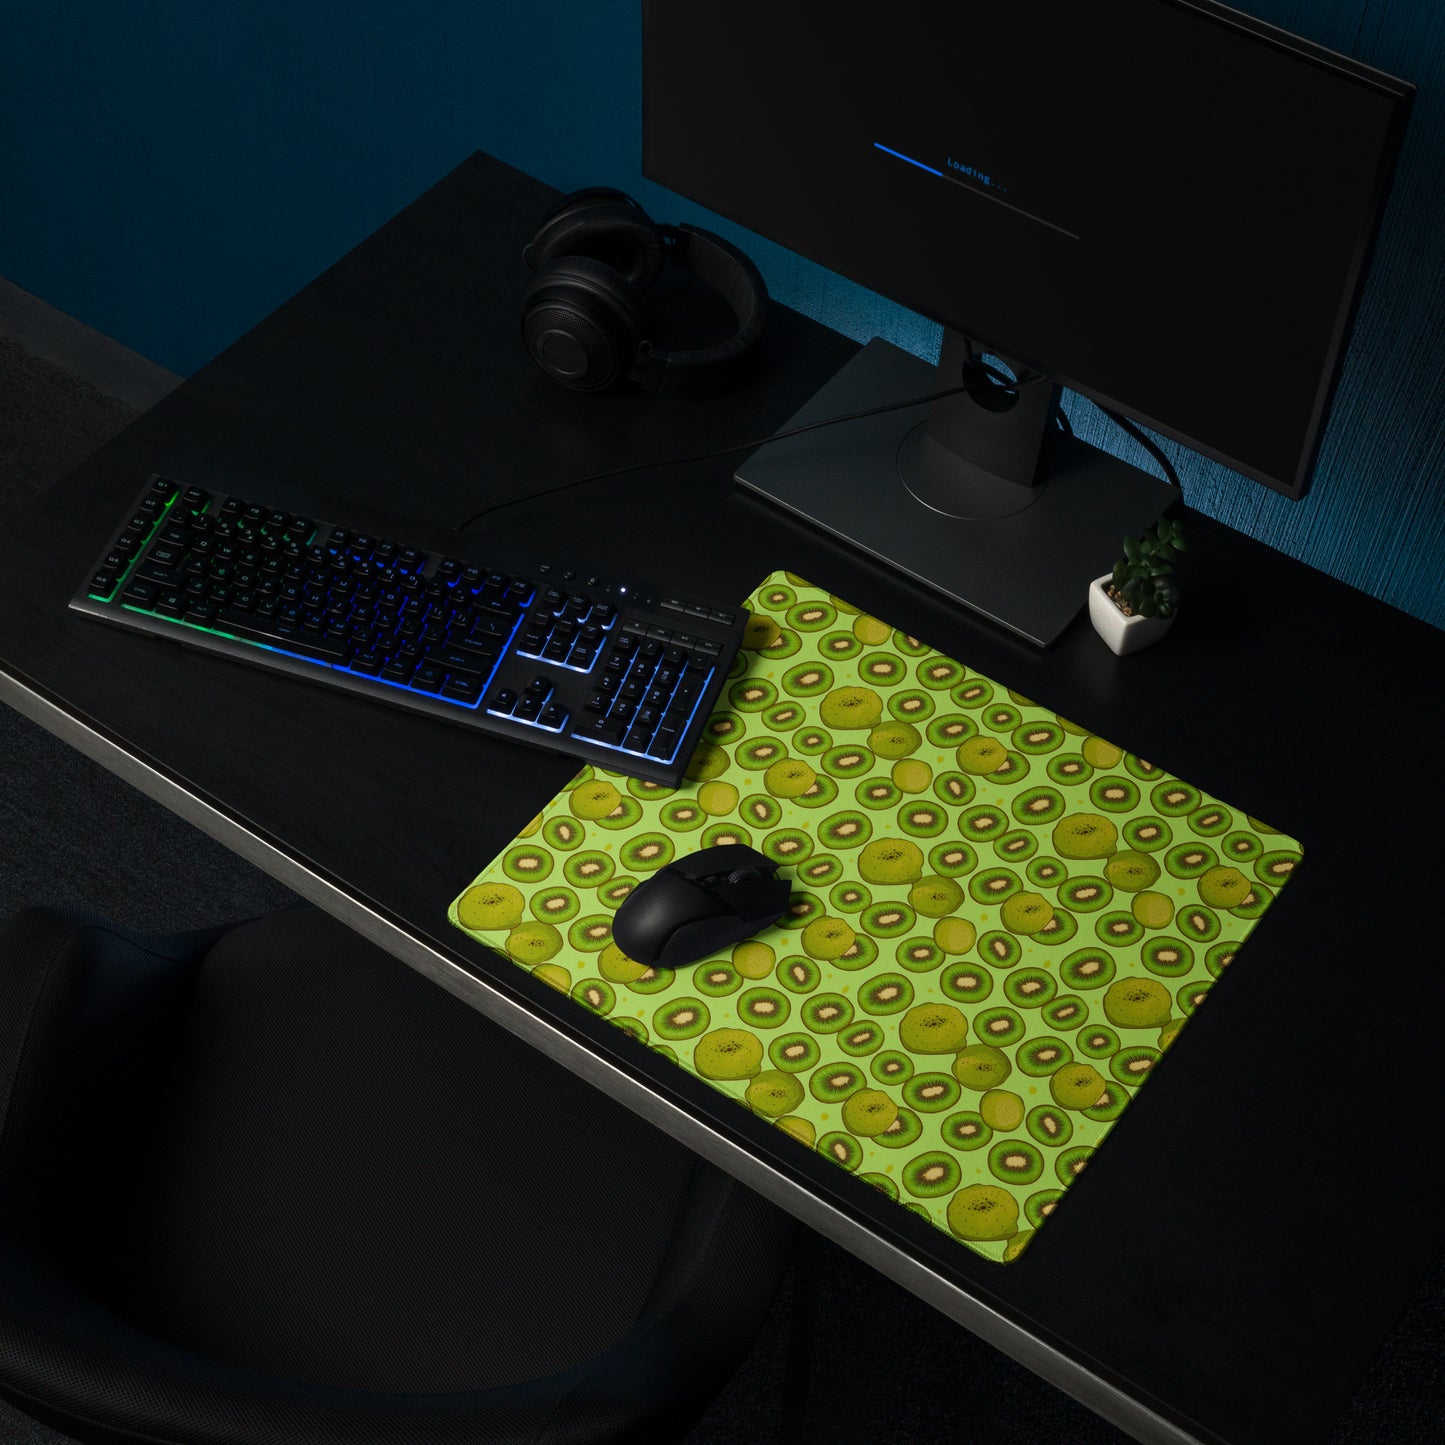 A 18" x 16" desk pad with Kiwis all over it shown on a desk setup. Green in color.